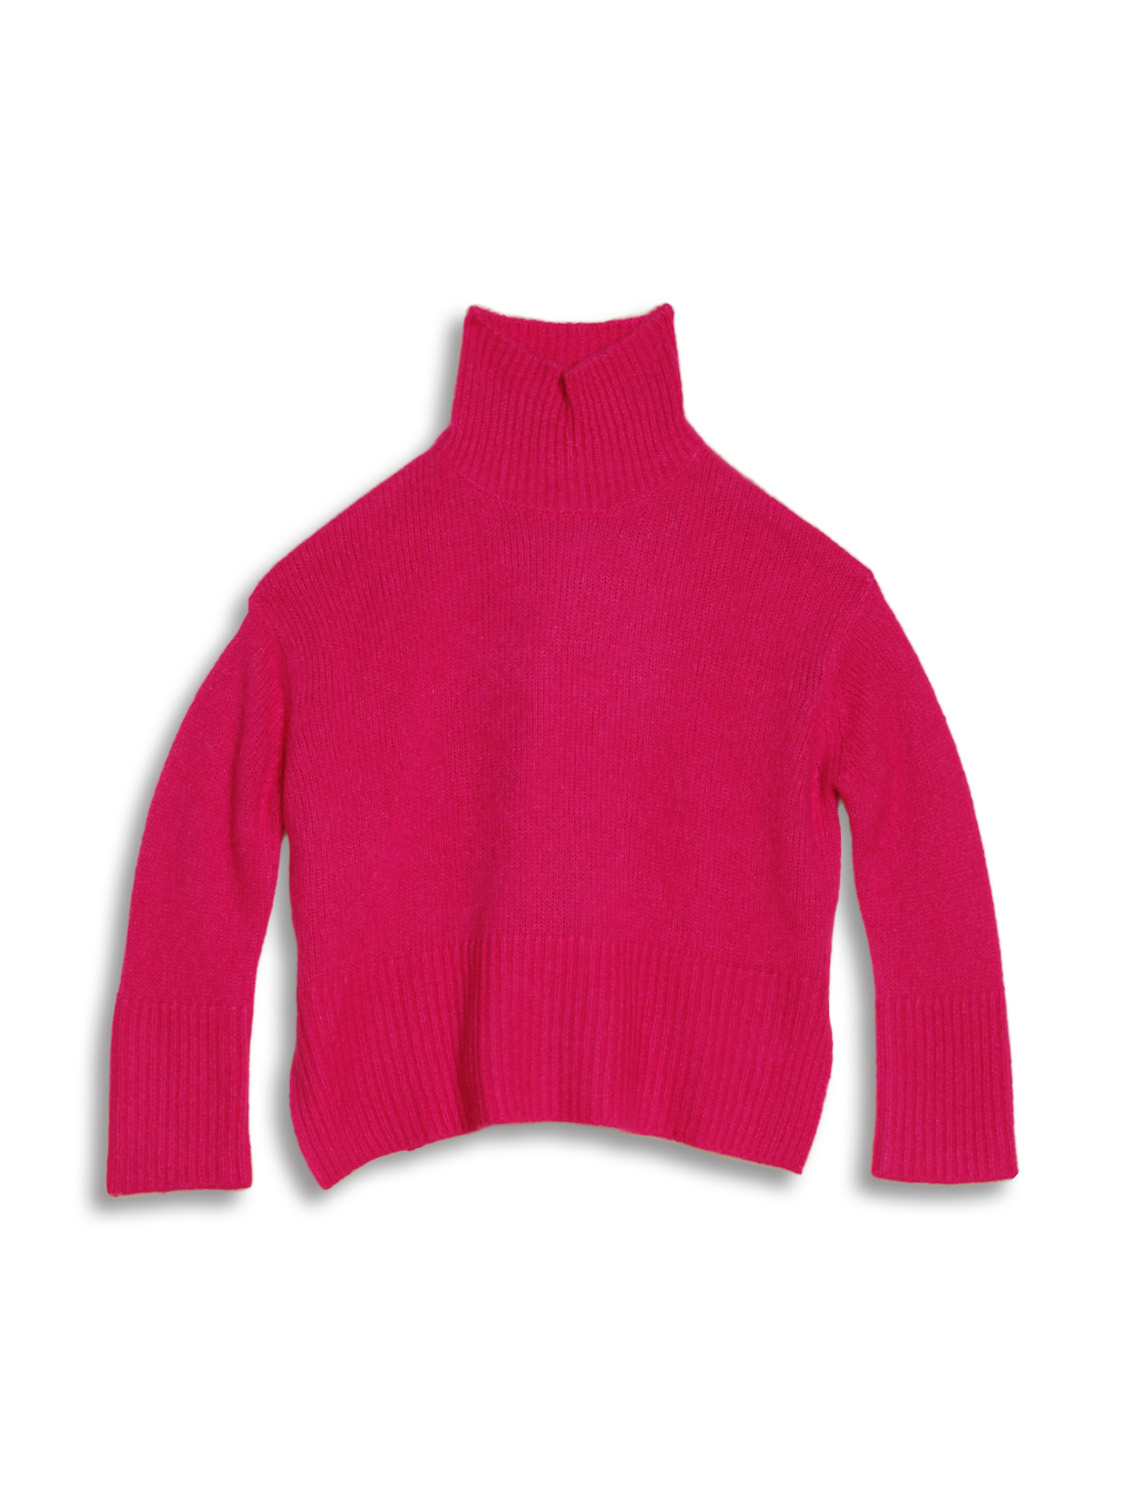 Miki - Oversized turtleneck sweater in cashmere